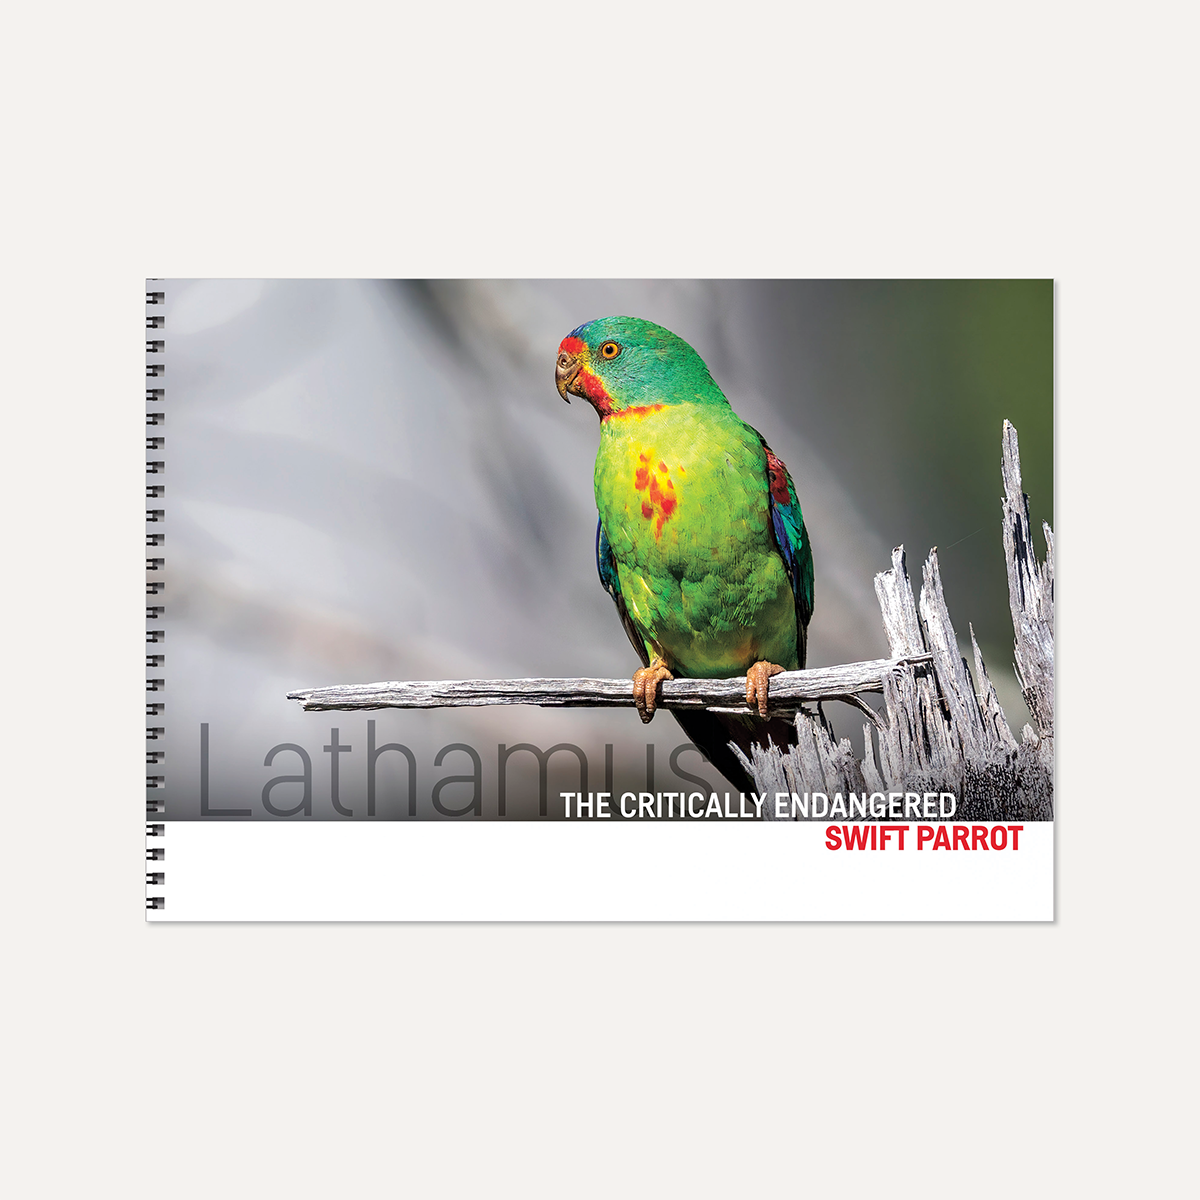 Lathamus -The Critically Endangered Swift Parrot